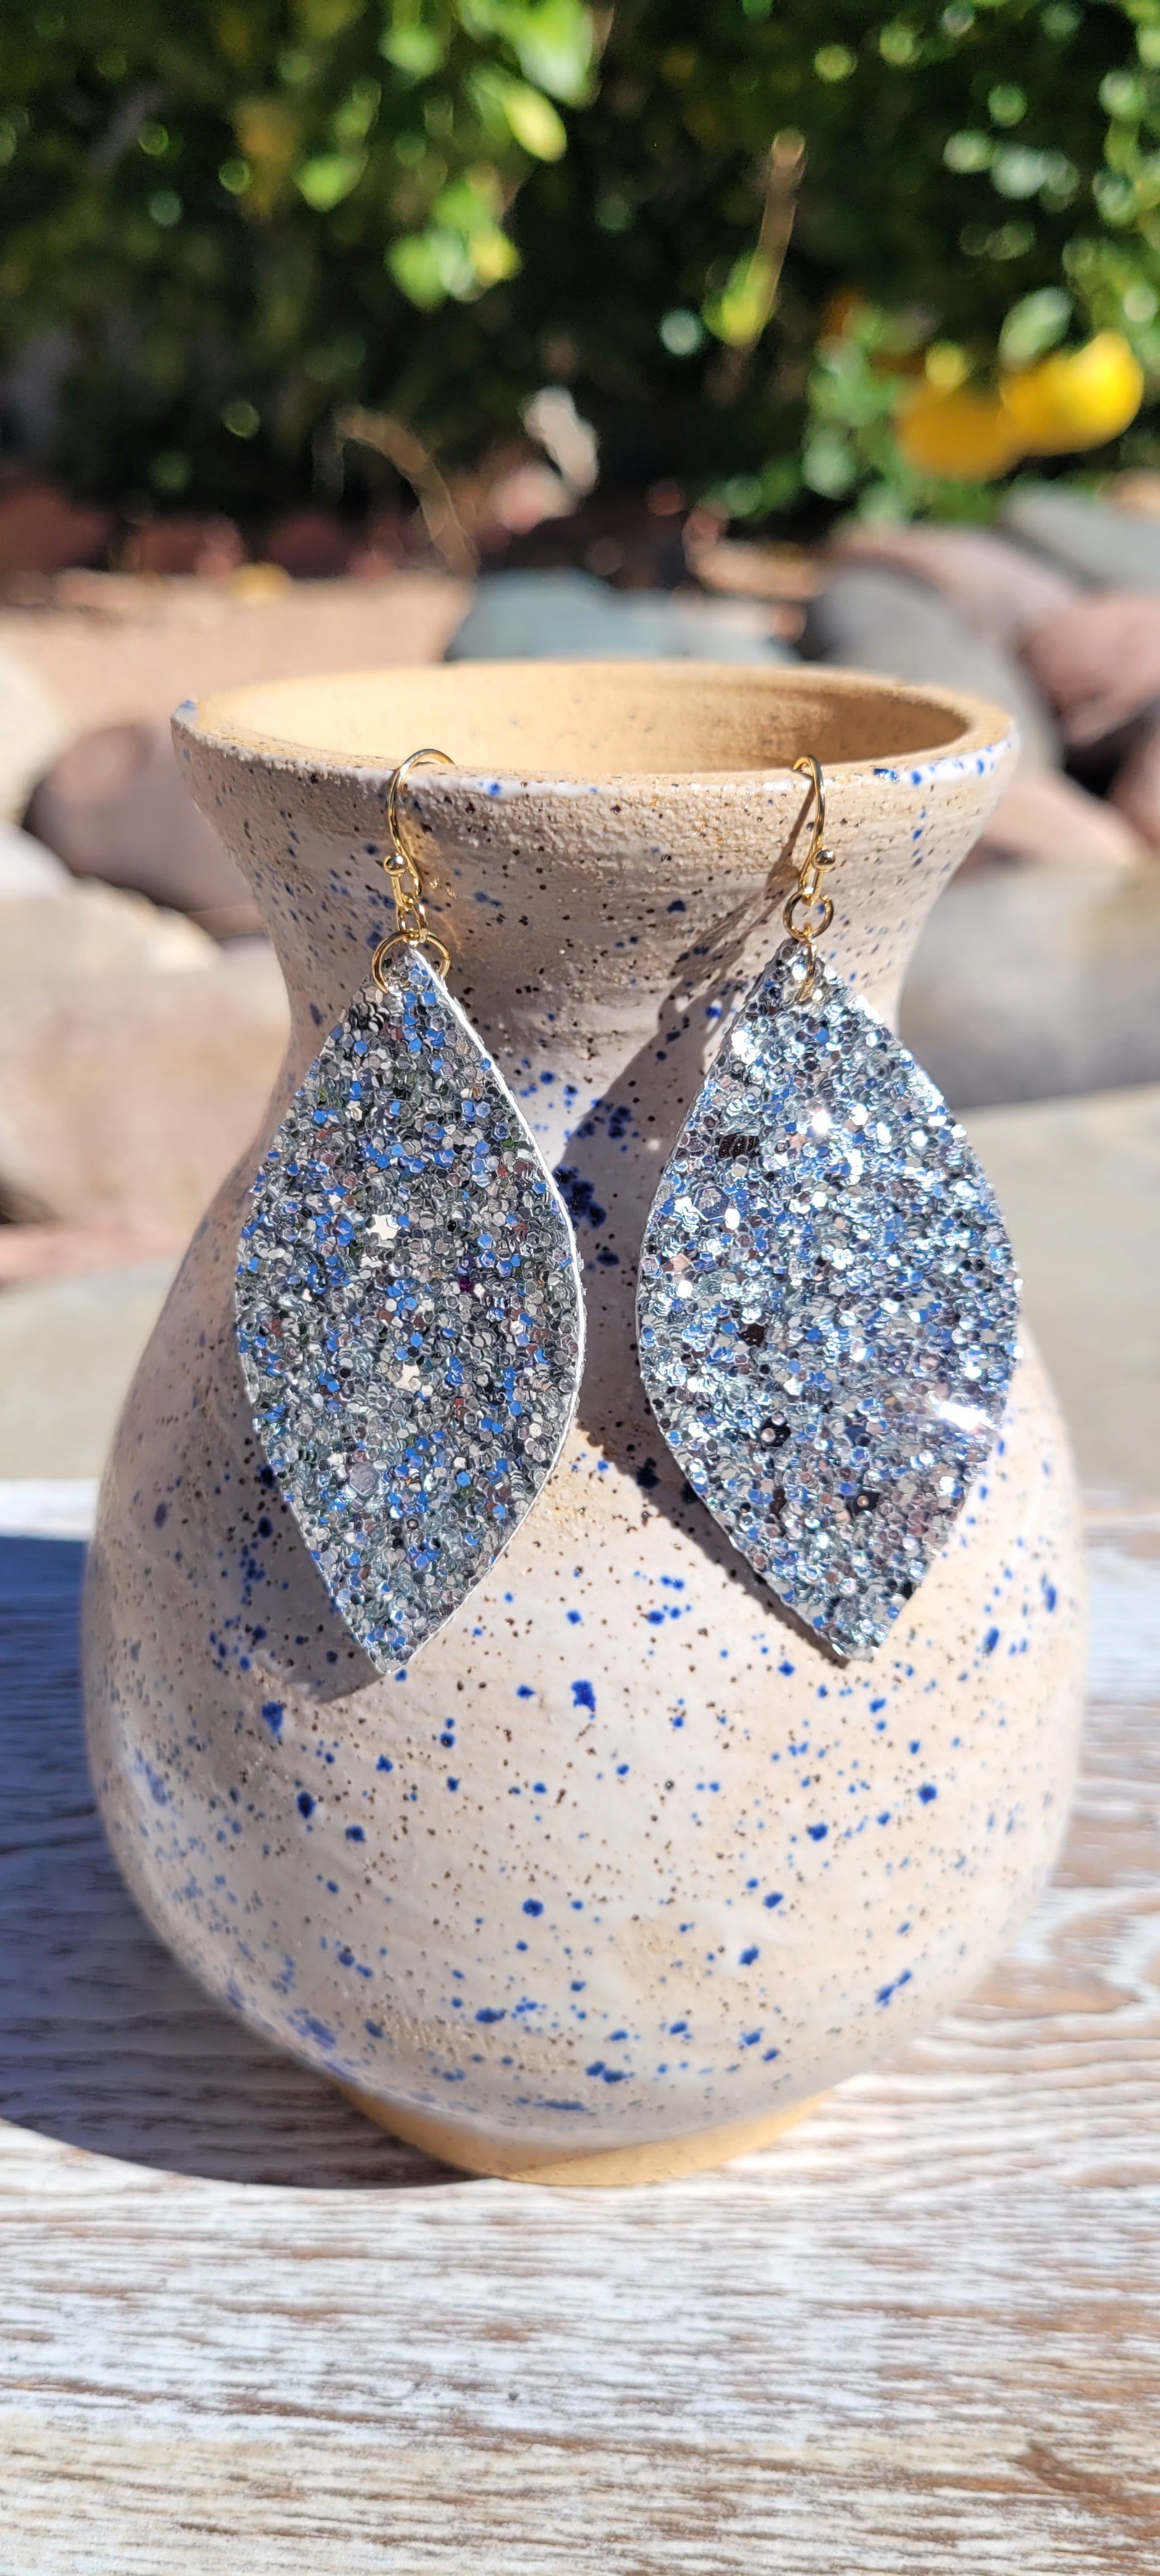 Marquise shape Silver glitter and sequins Brushed gold fish hook dangle earrings Rubber earring back Length 3” Whether you want to be on the wild side or classy this earring set it will add a fun touch to your outfit